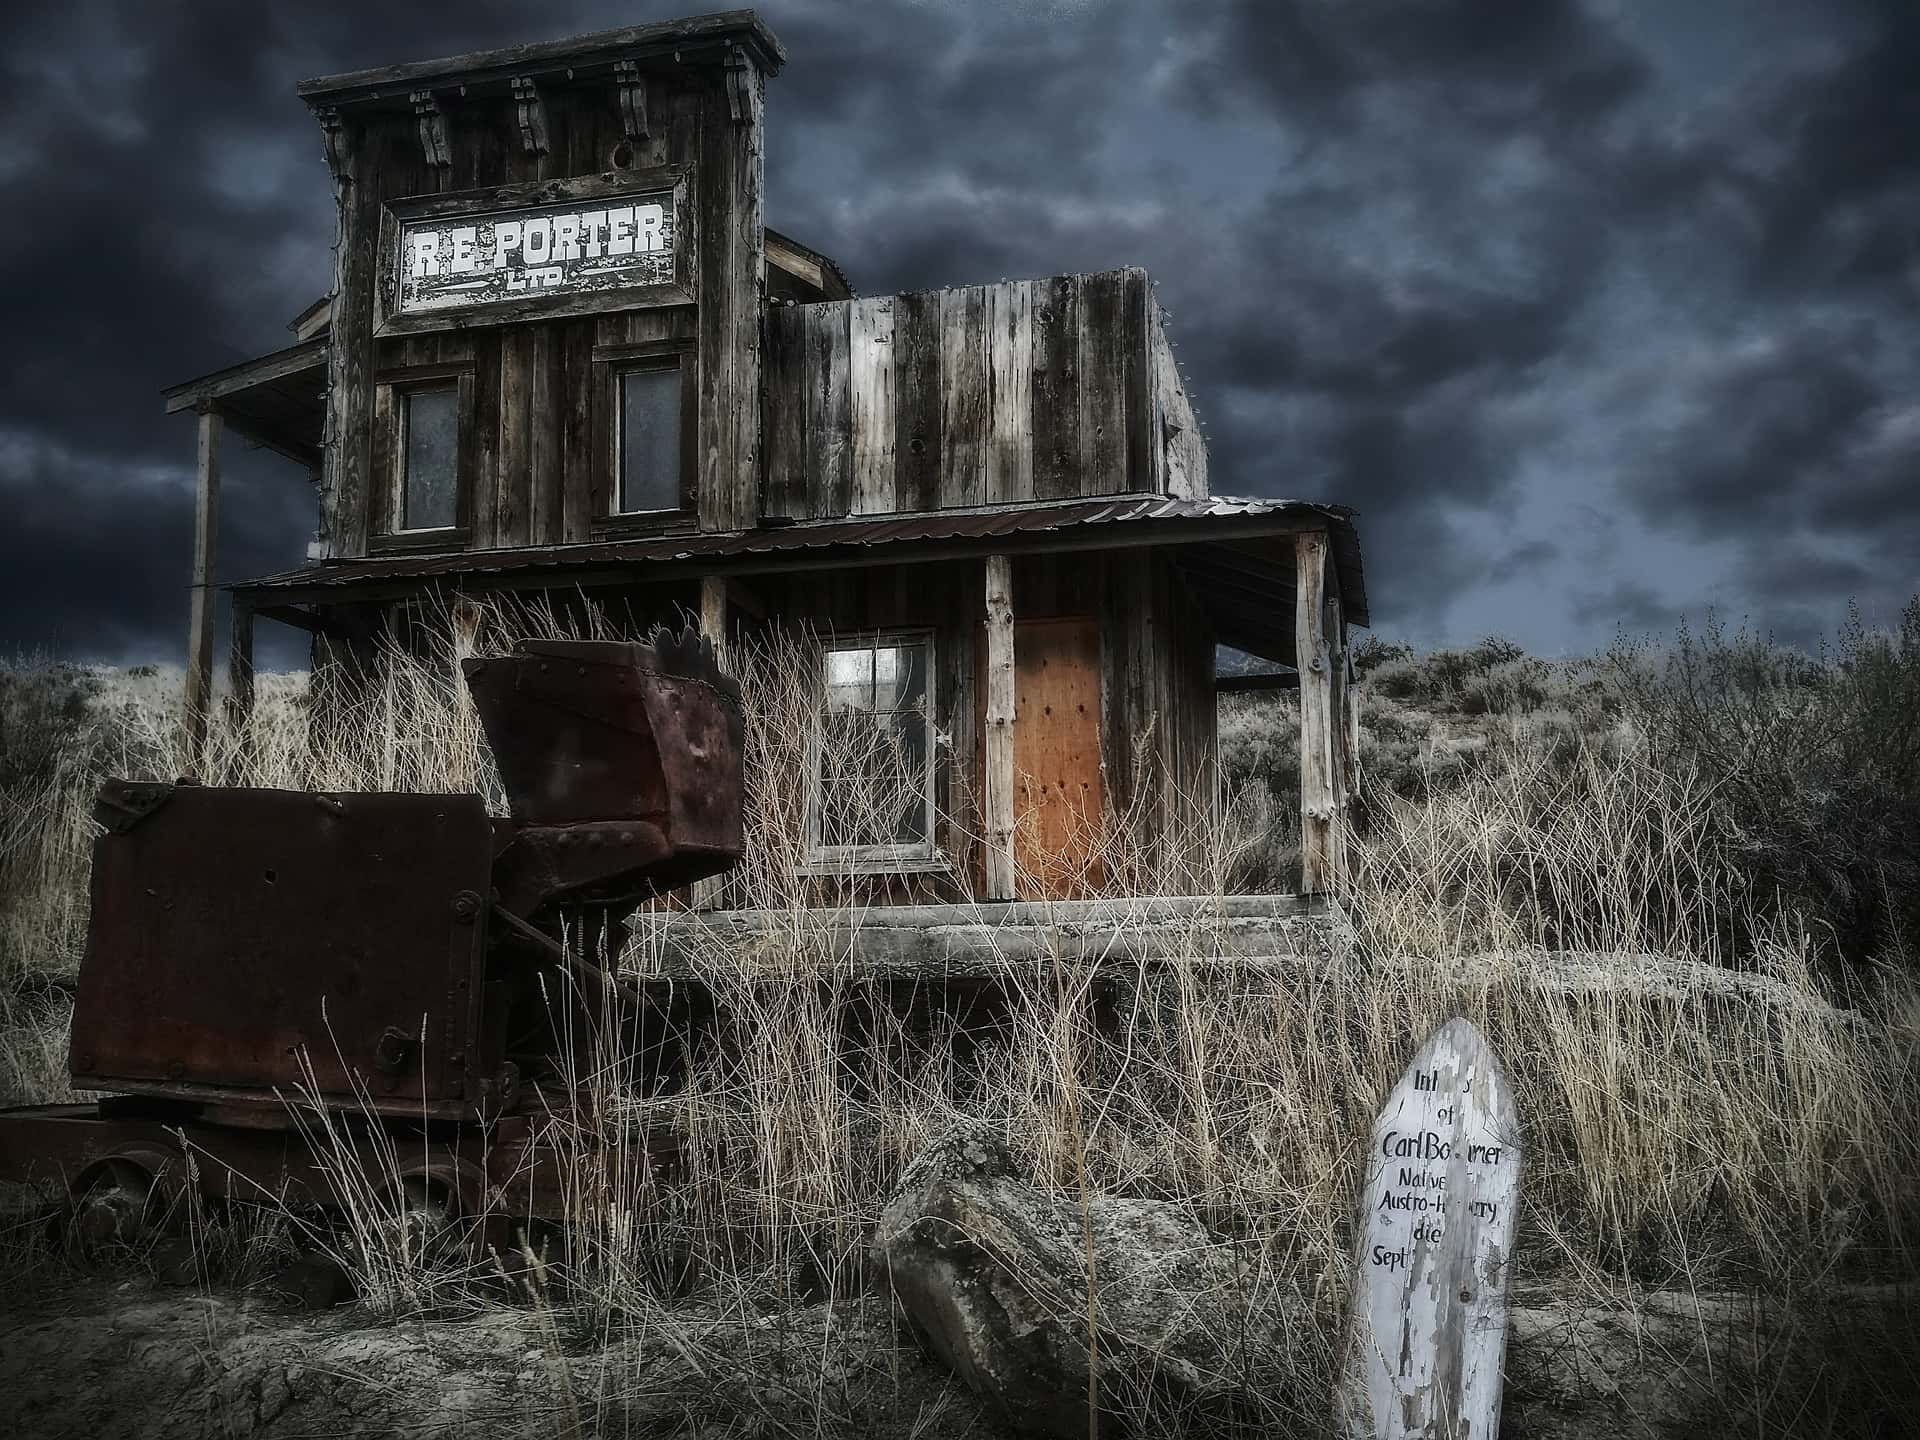 Ghost town, Definition, Facts, Images, & Reasons